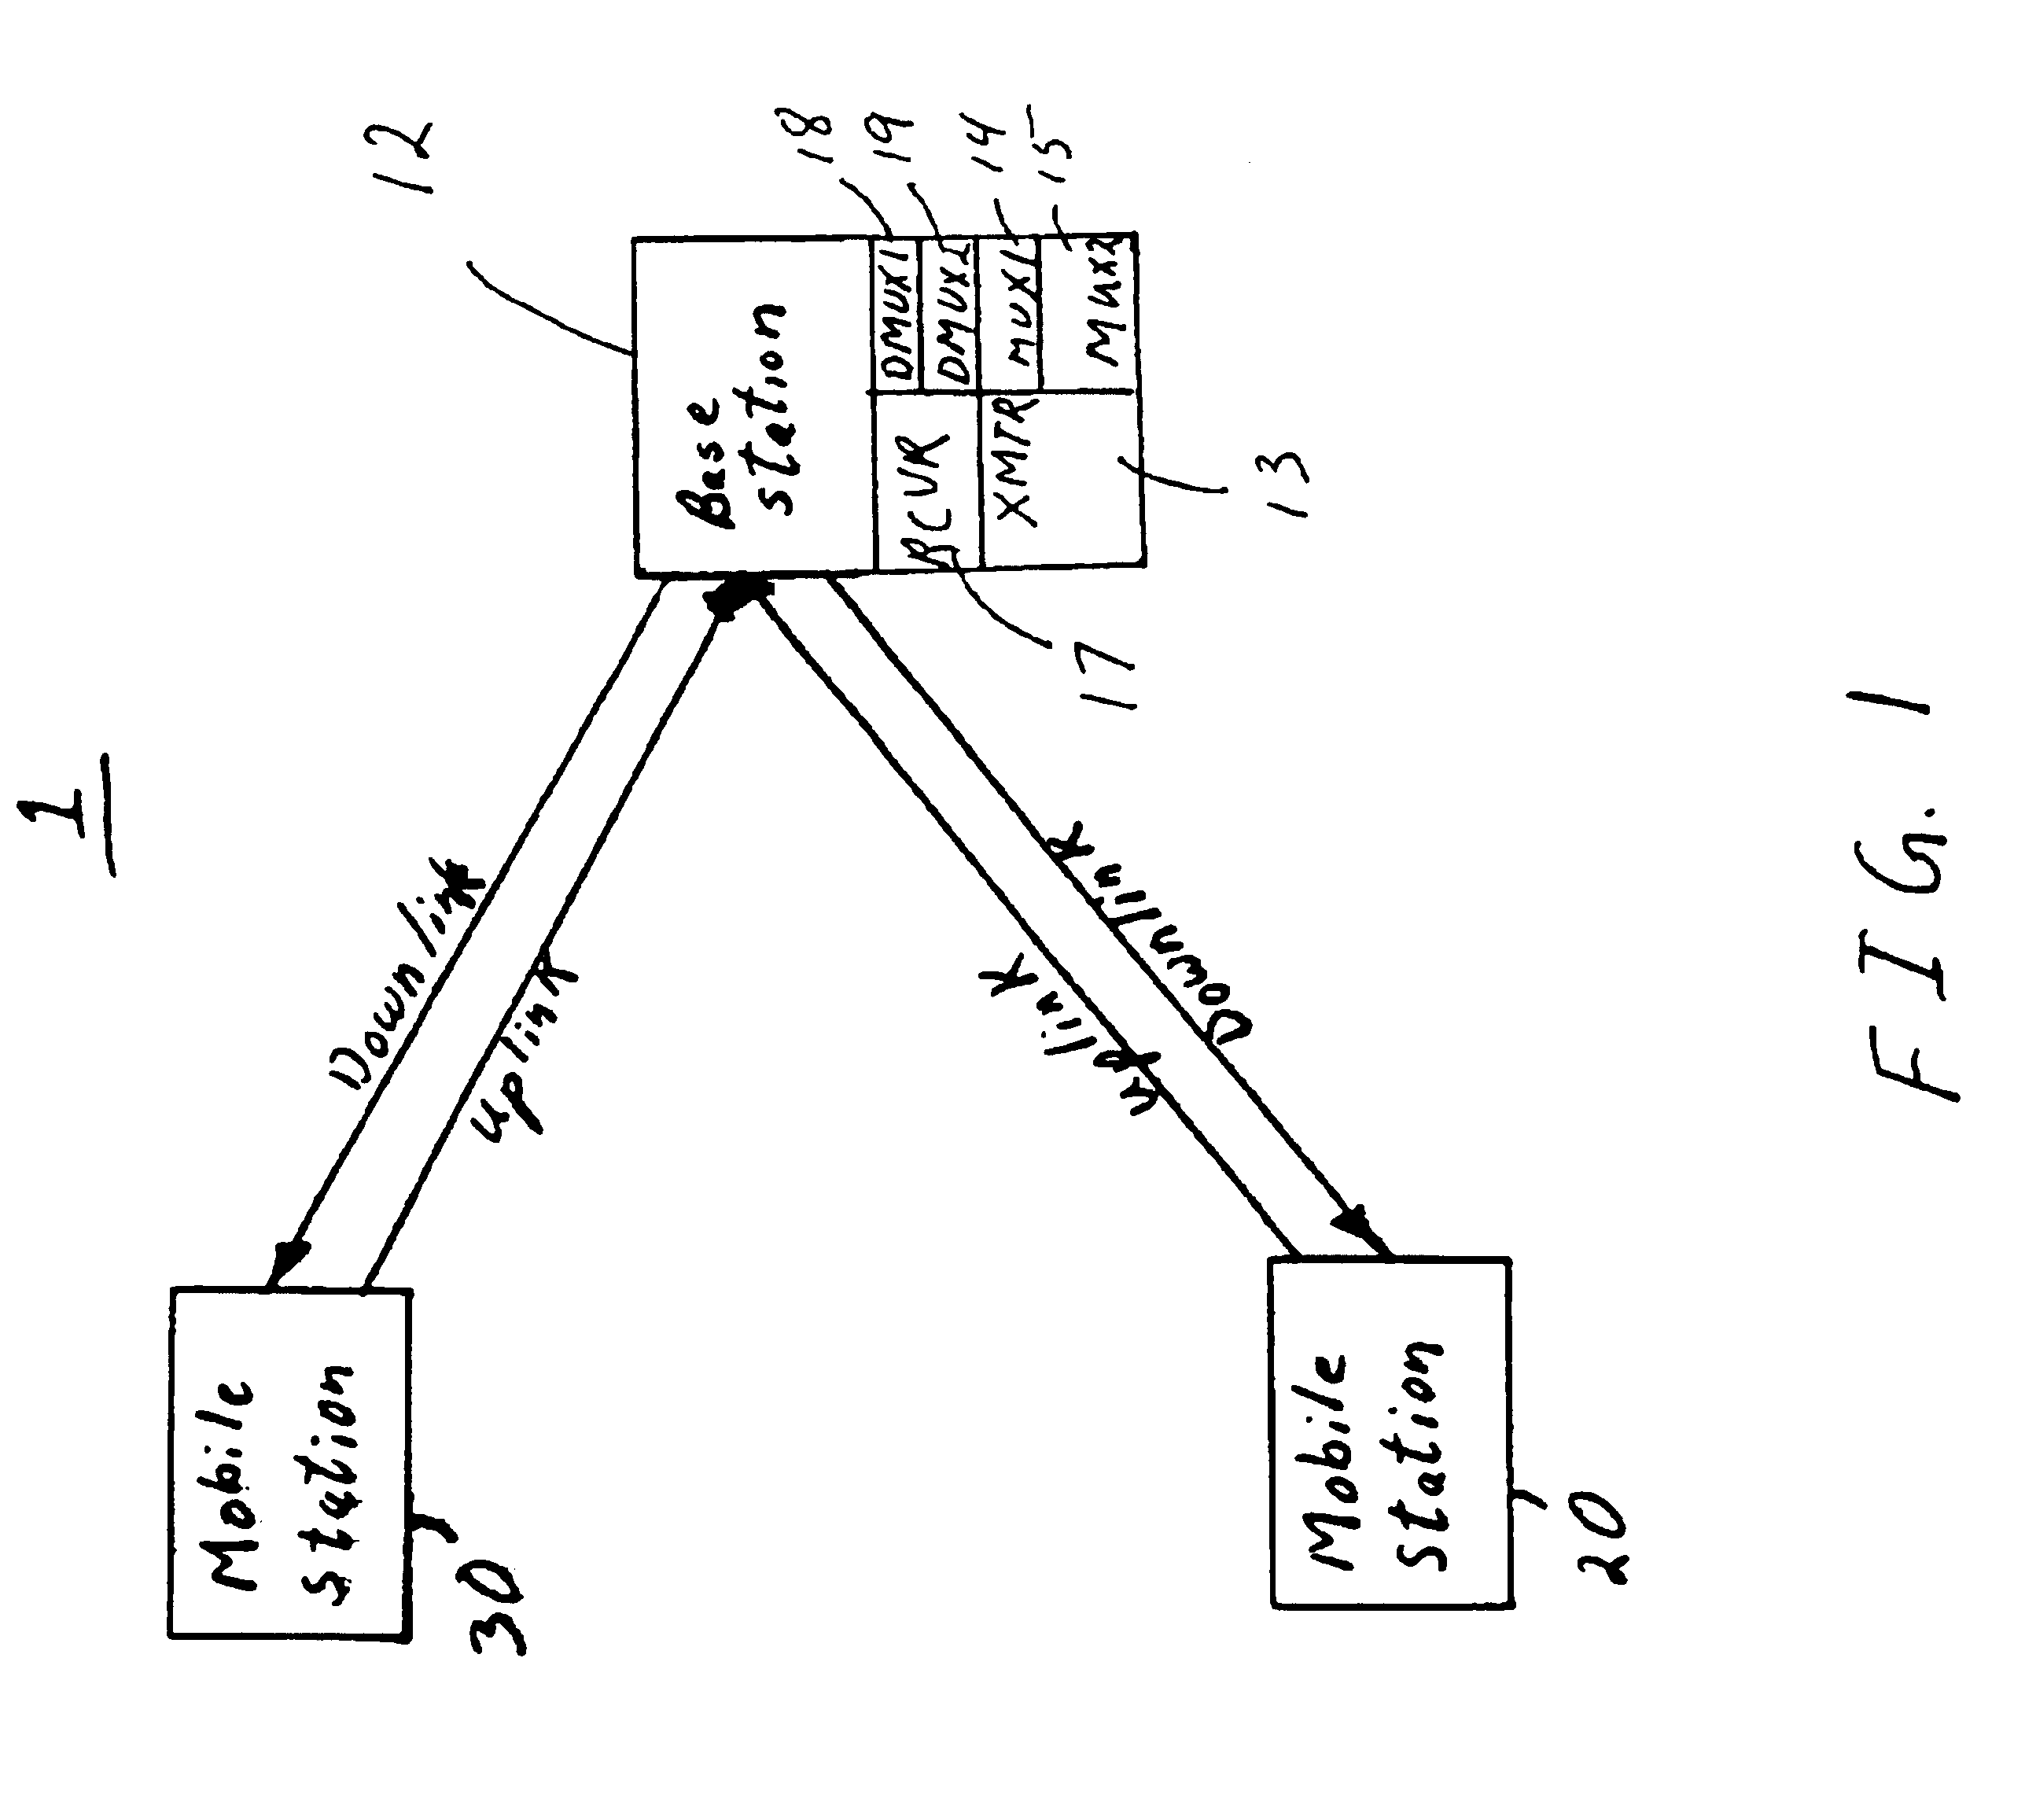 Method for interleaving of half rate channels suitable for half duplex operation and statistical multiplexing